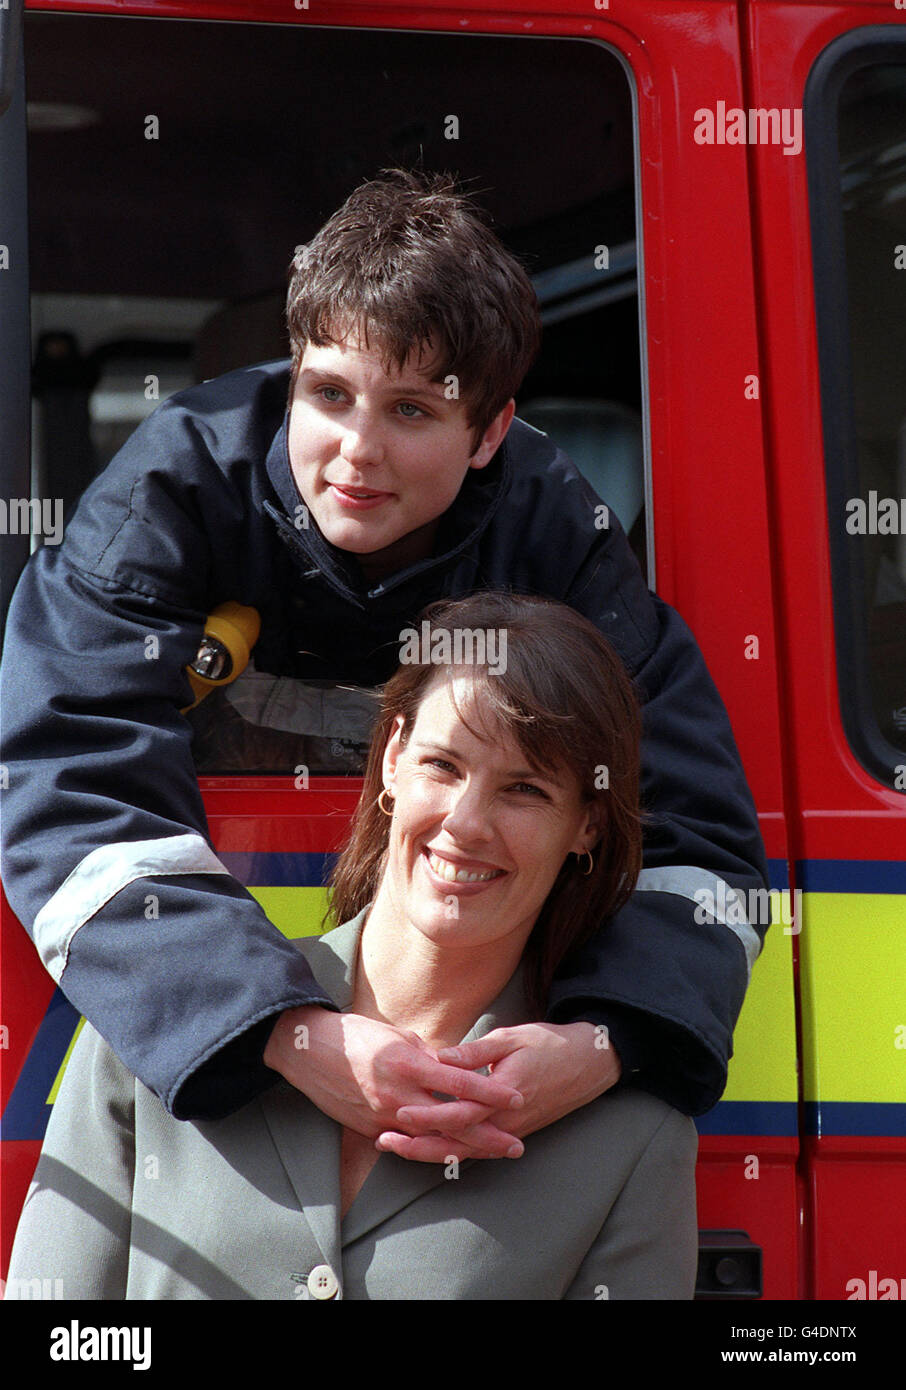 PA NEWS PHOTO 21/7/98 ACTRESS HEATHER PEACE, WHO PLAYS NEWCOMER SALLY FIELDS IN LONDON'S BURNING, WITH ONE OF THE FIRST FEMALE AMERICAN FIREFIGHTERS, CAROLINE PAUL. MS PAUL, THE IDENTICAL TWIN SISTER OF BAYWATCH STAR ALEXANDRA PAUL, IS IN LONDON TO PROMOTE HER BOOK 'FIGHTING FIRE'. Stock Photo